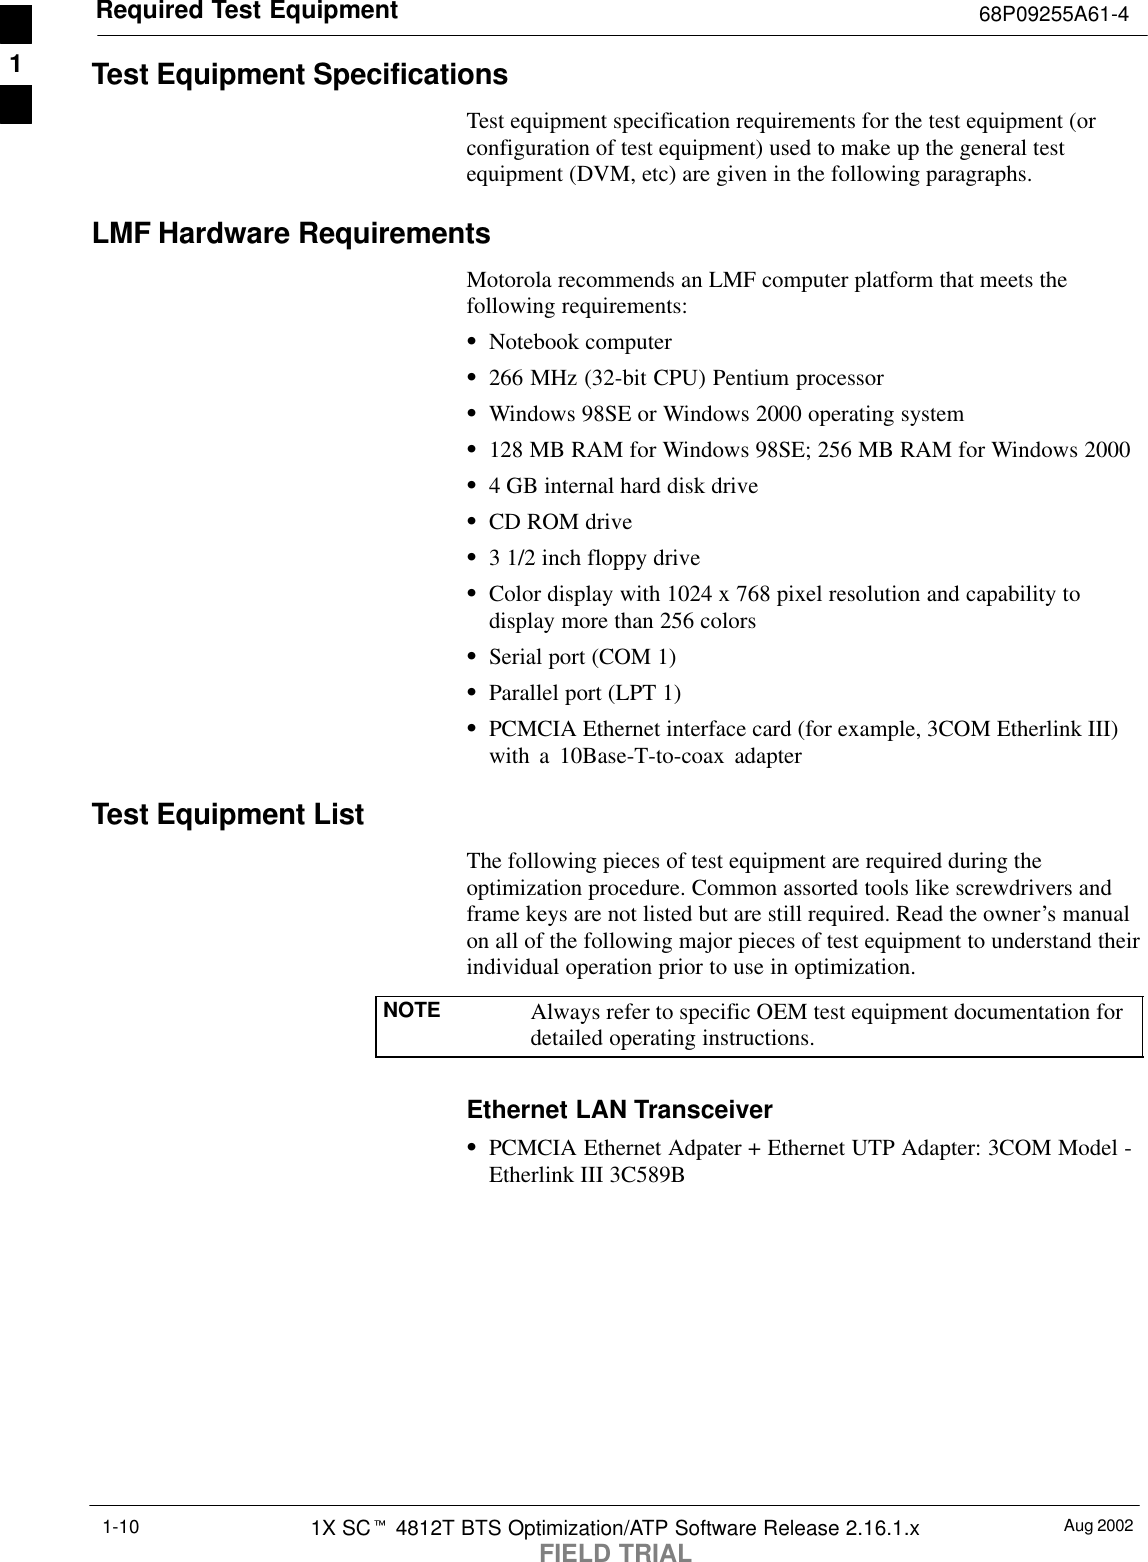 Required Test Equipment 68P09255A61-4Aug 20021X SCt 4812T BTS Optimization/ATP Software Release 2.16.1.xFIELD TRIAL1-10Test Equipment SpecificationsTest equipment specification requirements for the test equipment (orconfiguration of test equipment) used to make up the general testequipment (DVM, etc) are given in the following paragraphs.LMF Hardware RequirementsMotorola recommends an LMF computer platform that meets thefollowing requirements:SNotebook computerS266 MHz (32-bit CPU) Pentium processorSWindows 98SE or Windows 2000 operating systemS128 MB RAM for Windows 98SE; 256 MB RAM for Windows 2000S4 GB internal hard disk driveSCD ROM driveS3 1/2 inch floppy driveSColor display with 1024 x 768 pixel resolution and capability todisplay more than 256 colorsSSerial port (COM 1)SParallel port (LPT 1)SPCMCIA Ethernet interface card (for example, 3COM Etherlink III)with a 10Base-T-to-coax adapterTest Equipment ListThe following pieces of test equipment are required during theoptimization procedure. Common assorted tools like screwdrivers andframe keys are not listed but are still required. Read the owner’s manualon all of the following major pieces of test equipment to understand theirindividual operation prior to use in optimization.NOTE Always refer to specific OEM test equipment documentation fordetailed operating instructions.Ethernet LAN TransceiverSPCMCIA Ethernet Adpater + Ethernet UTP Adapter: 3COM Model -Etherlink III 3C589B1